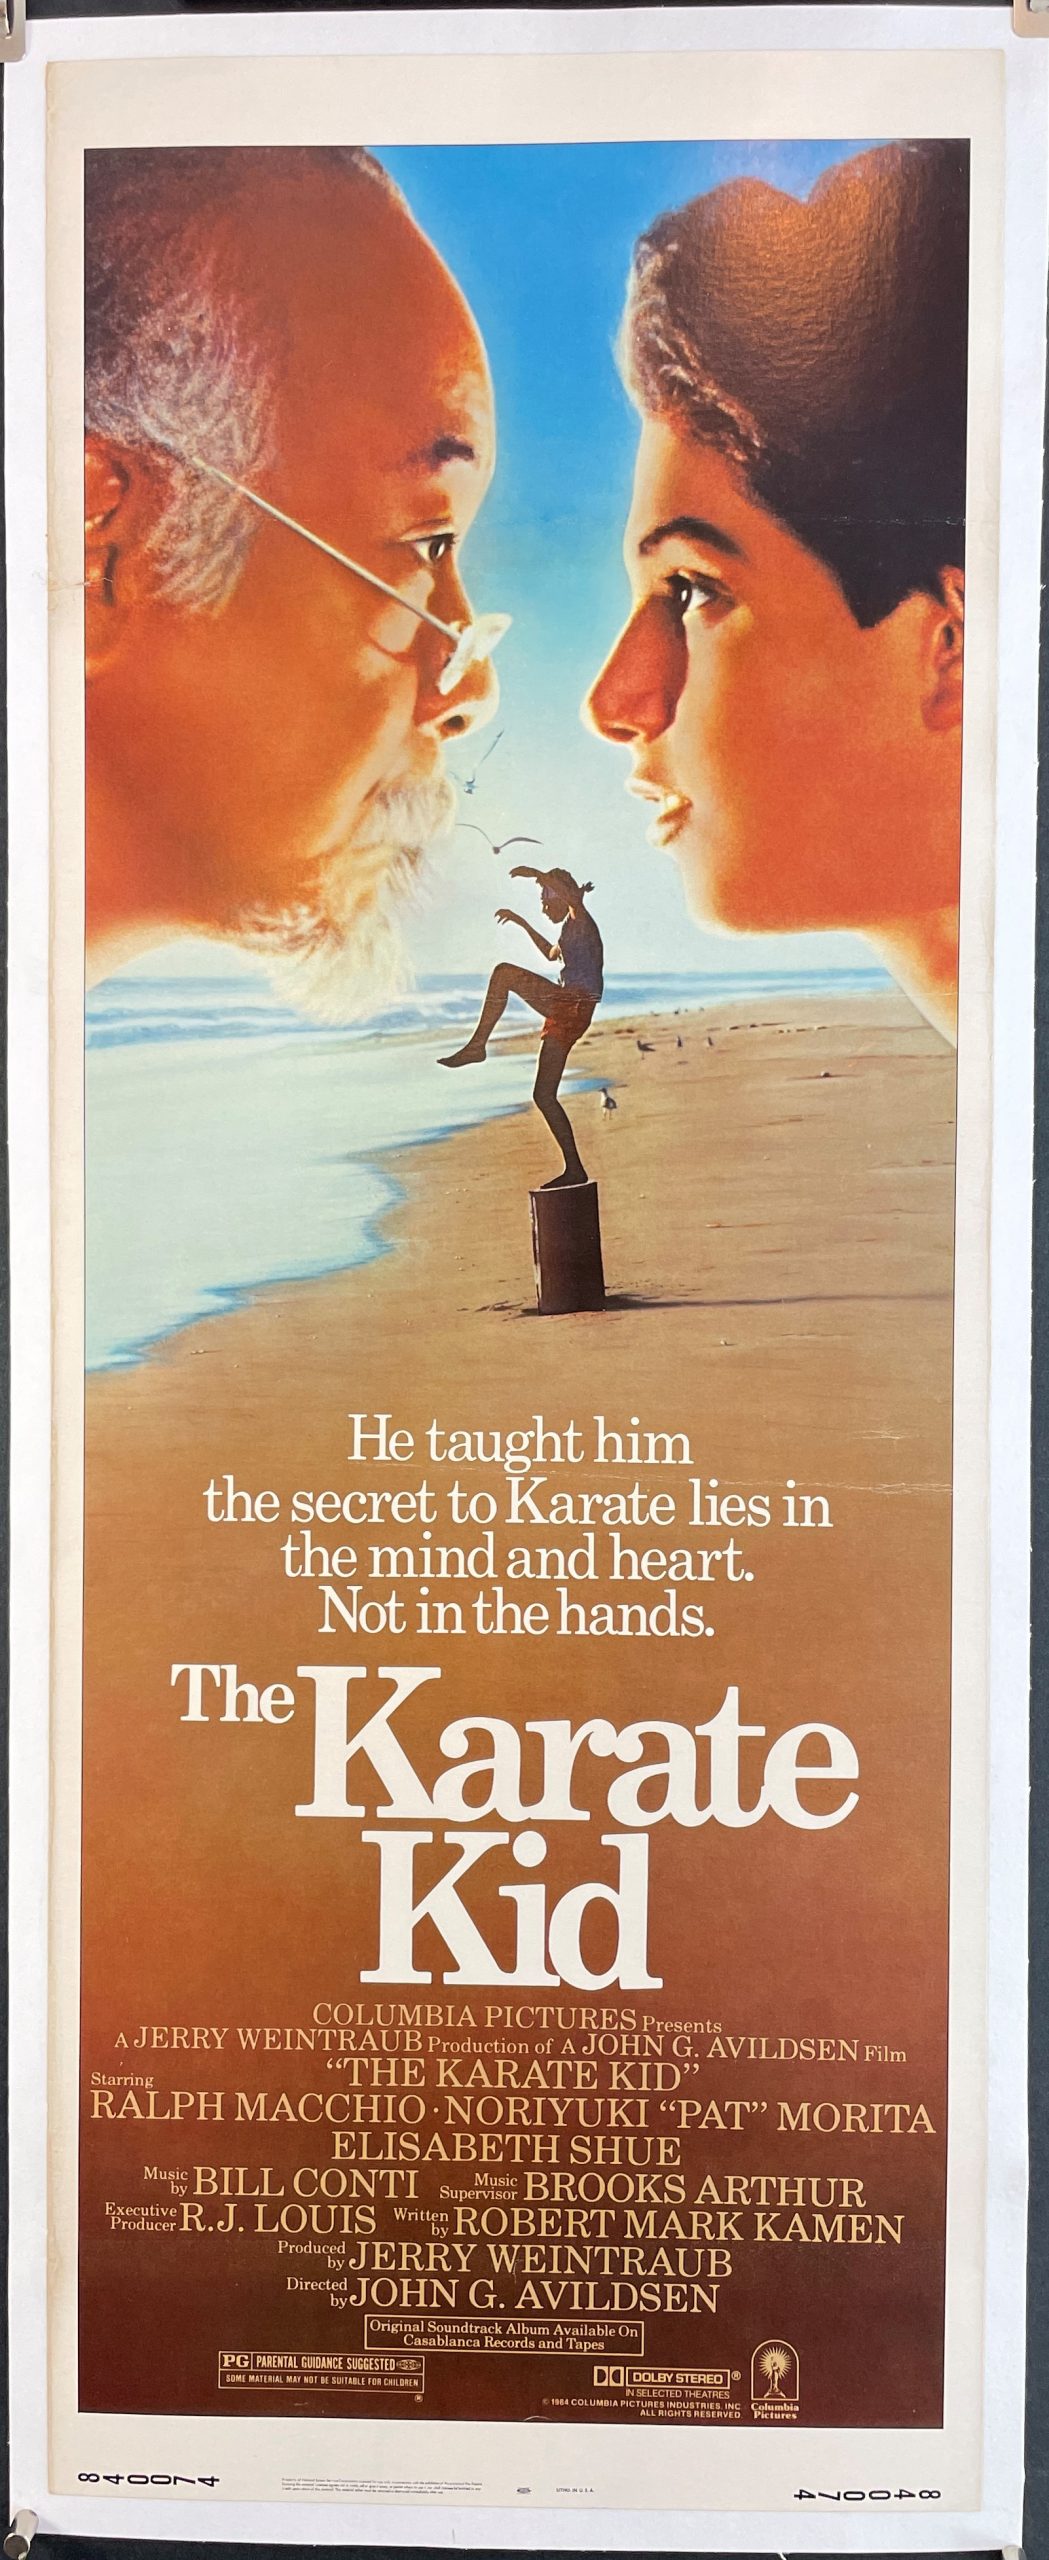 The Karate Kid, Action and adventure films